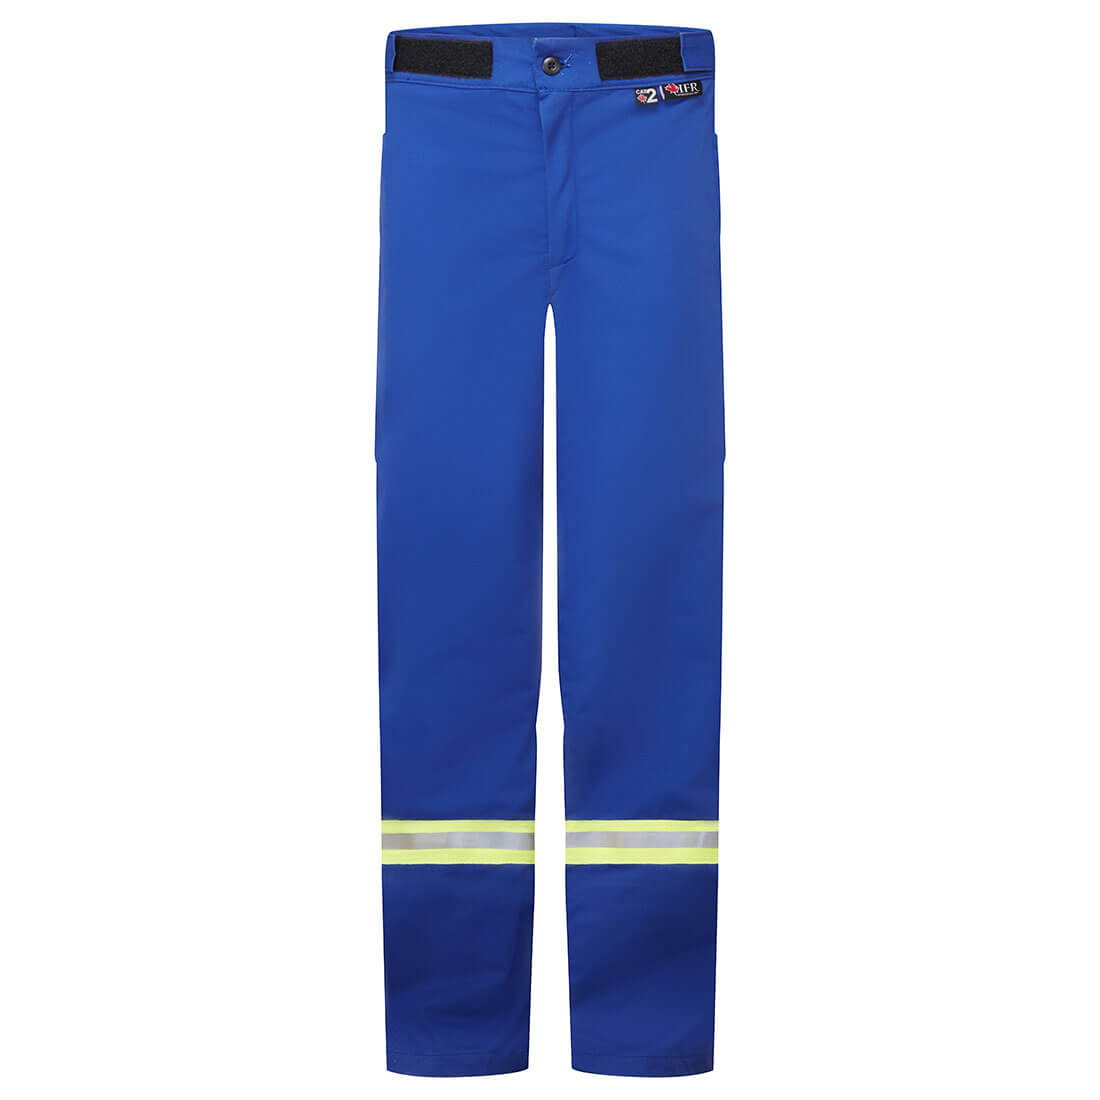 IFR Flame Resistant, Pants